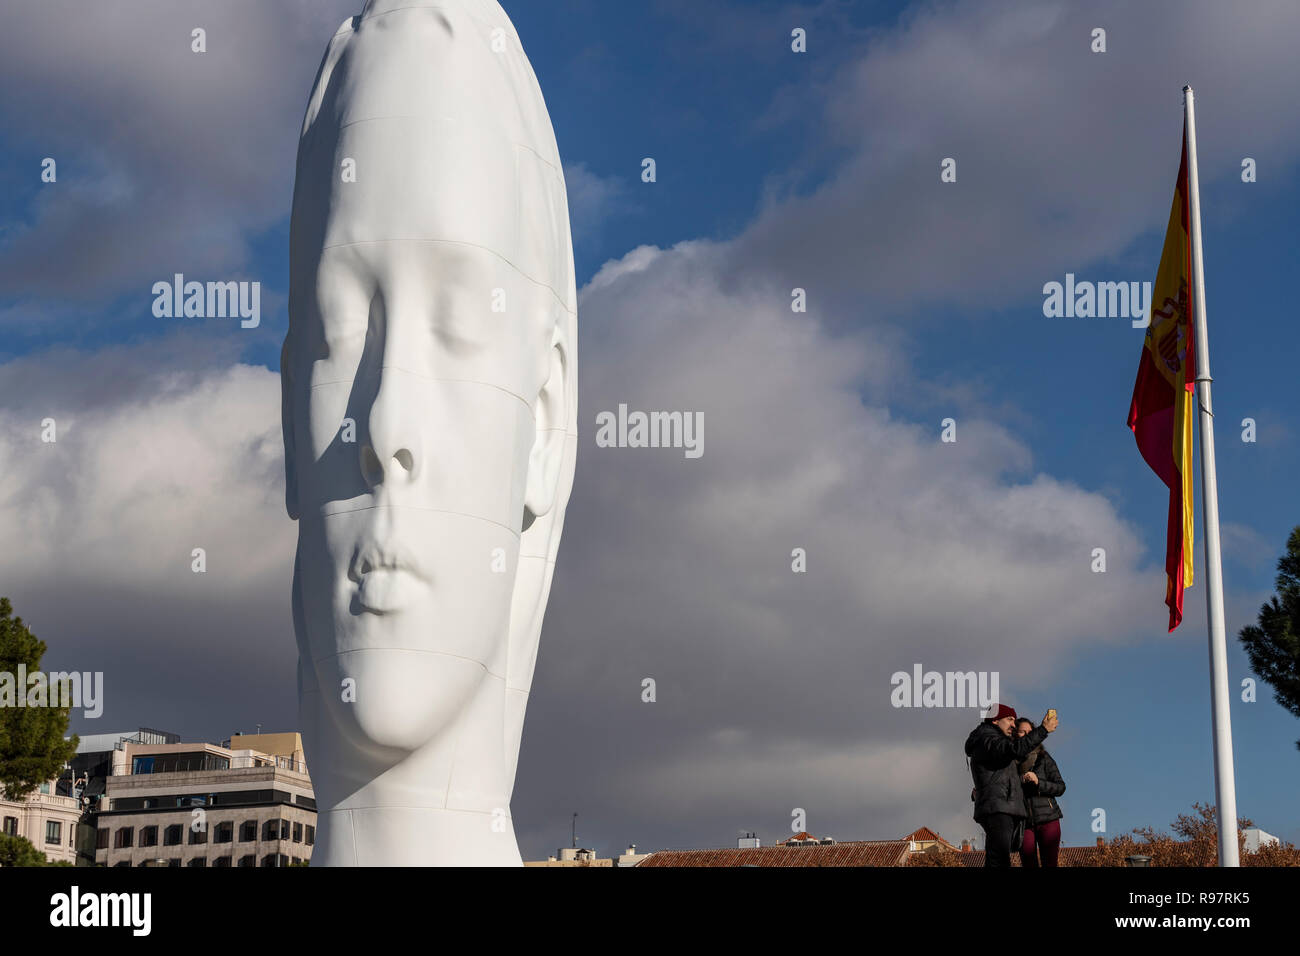 Couple taking a selfie with Julia, white marble sculpture by Jaume Plensa in Plaza Colon, Madrid, Spain Stock Photo